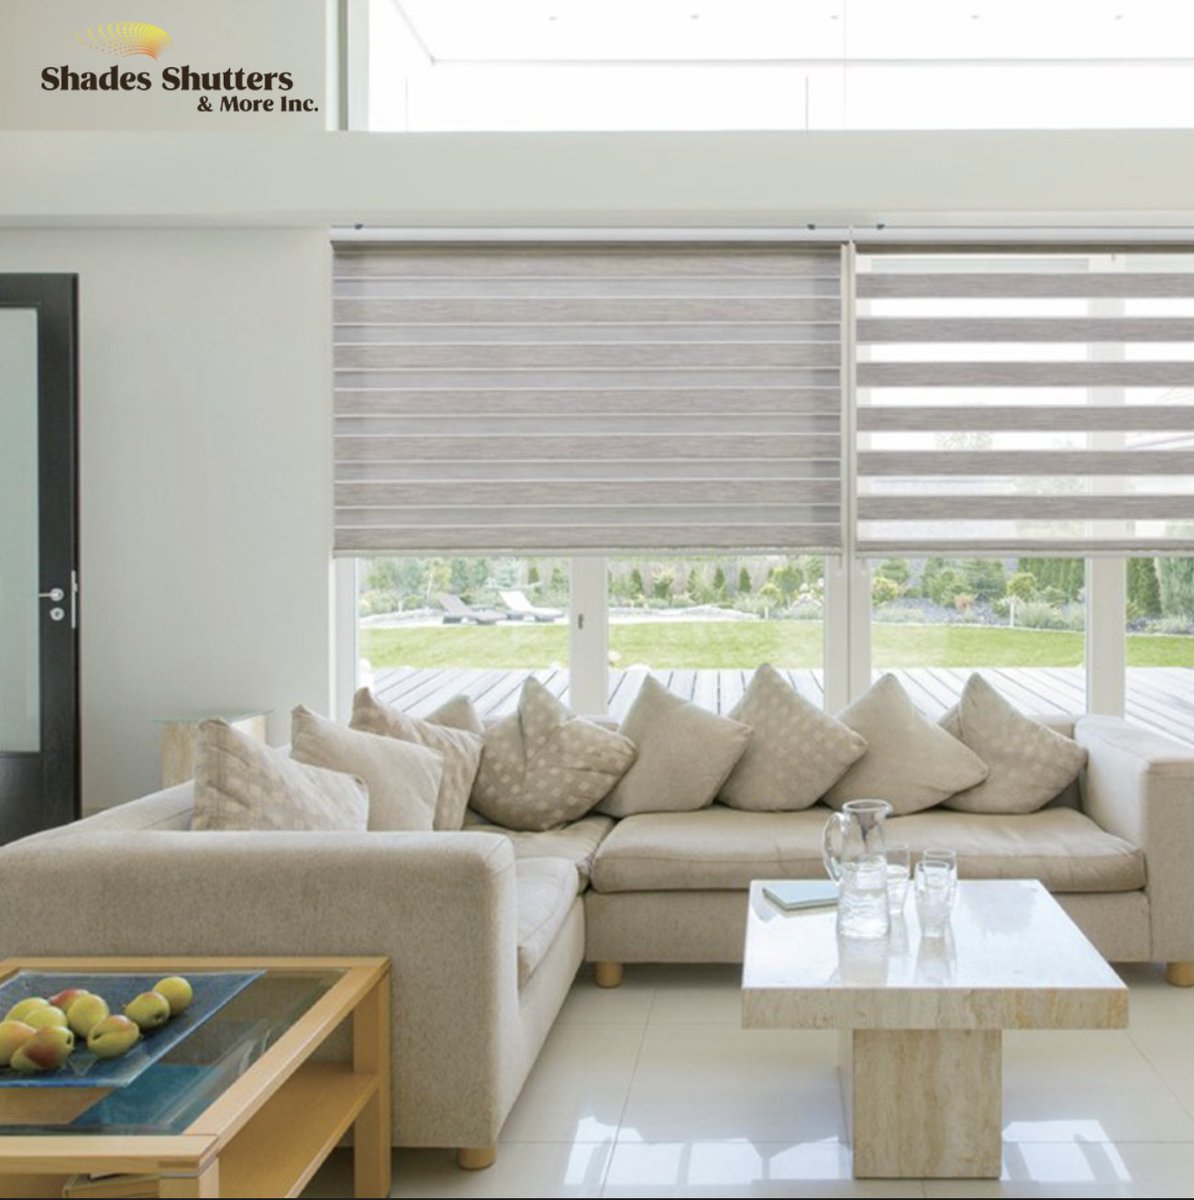 'Dual Shades. Sleek fabric bands for privacy combined with sheer bands for view. Flexible. Compatible. And oh so good looking. Has you wondering why you haven't met before.

Book Free Consultation, Call us ☎ (877) 770-8787

#highqualityfabrics #dualshades #combishades #texas #CA